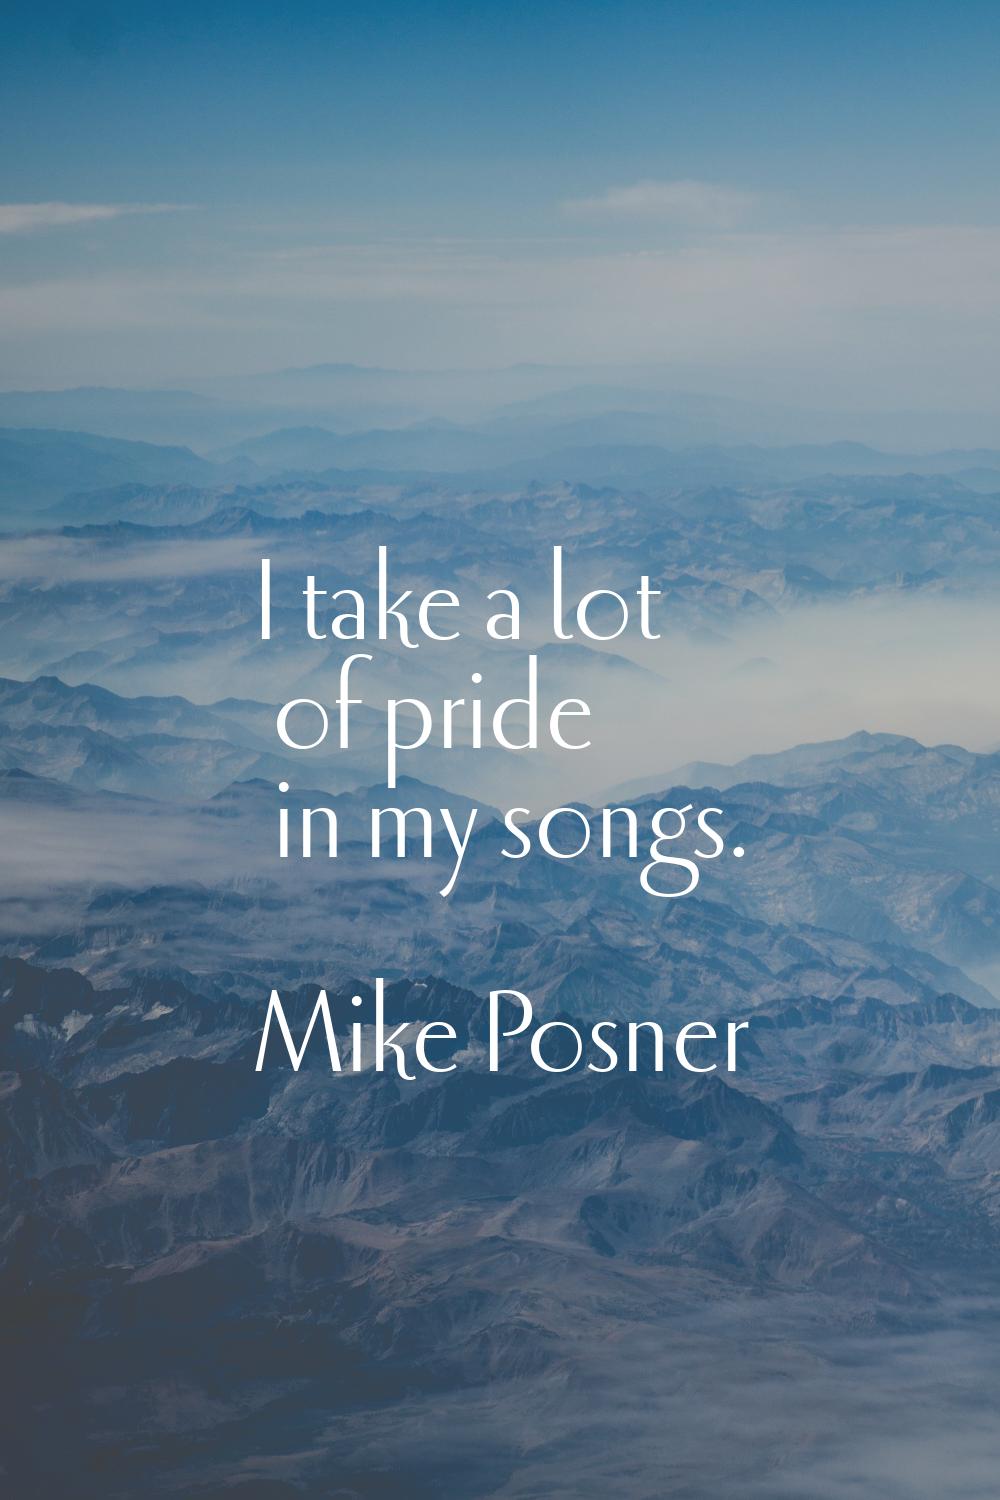 I take a lot of pride in my songs.